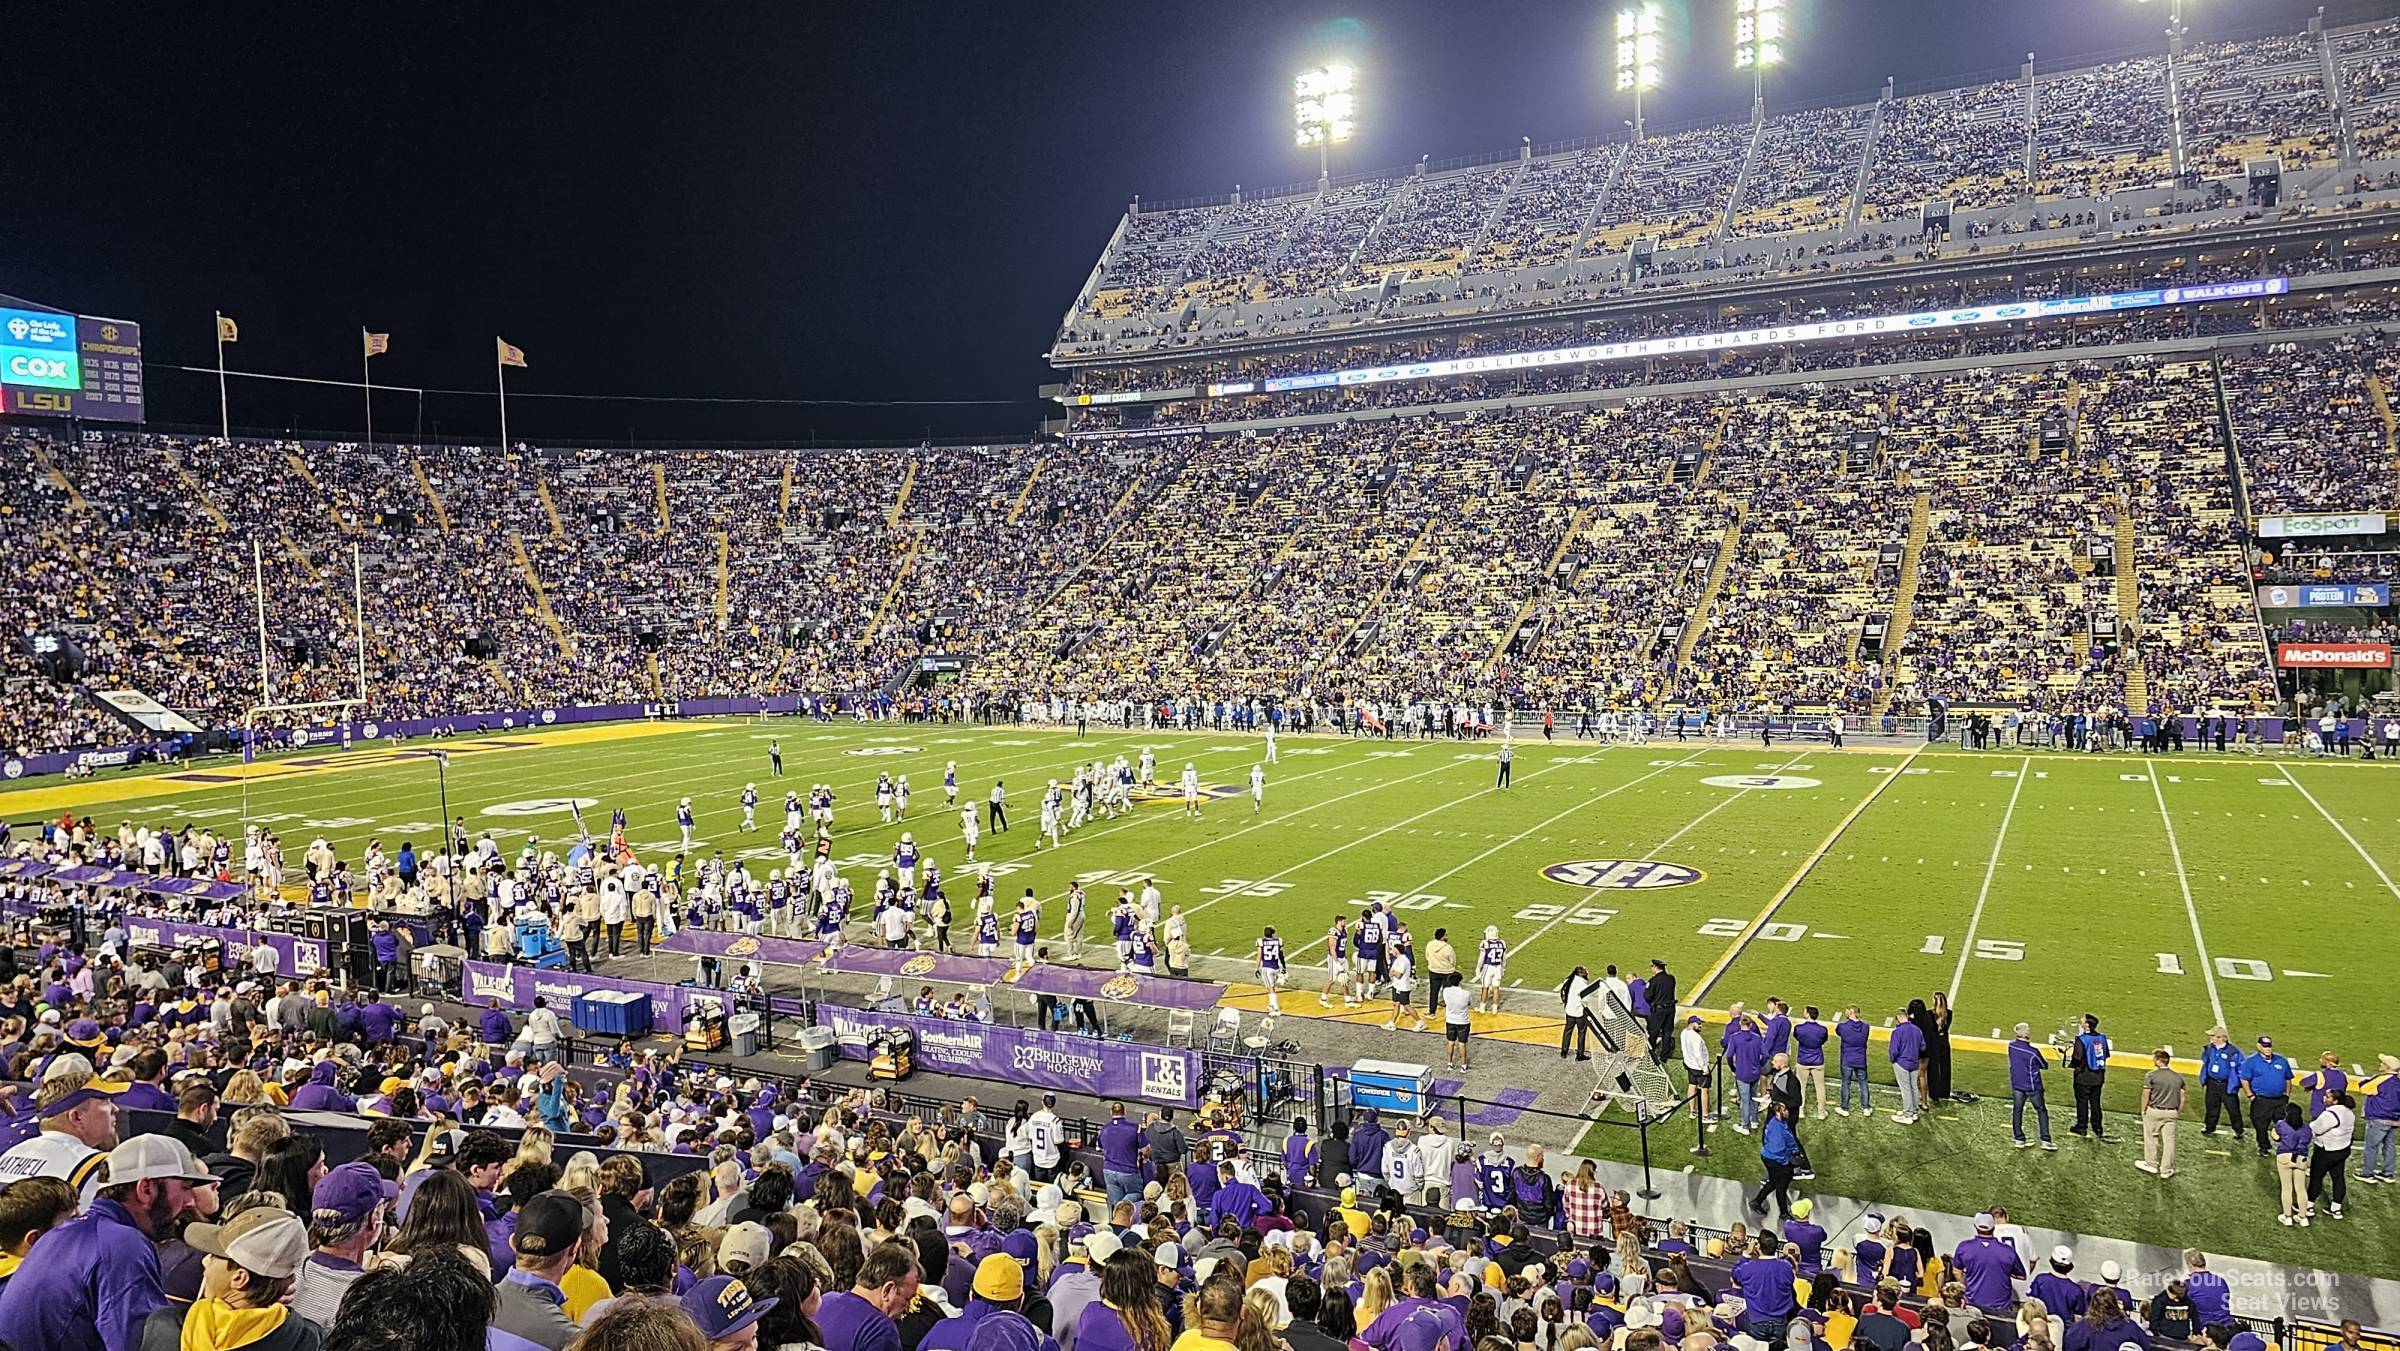 section 101, row 26 seat view  - tiger stadium